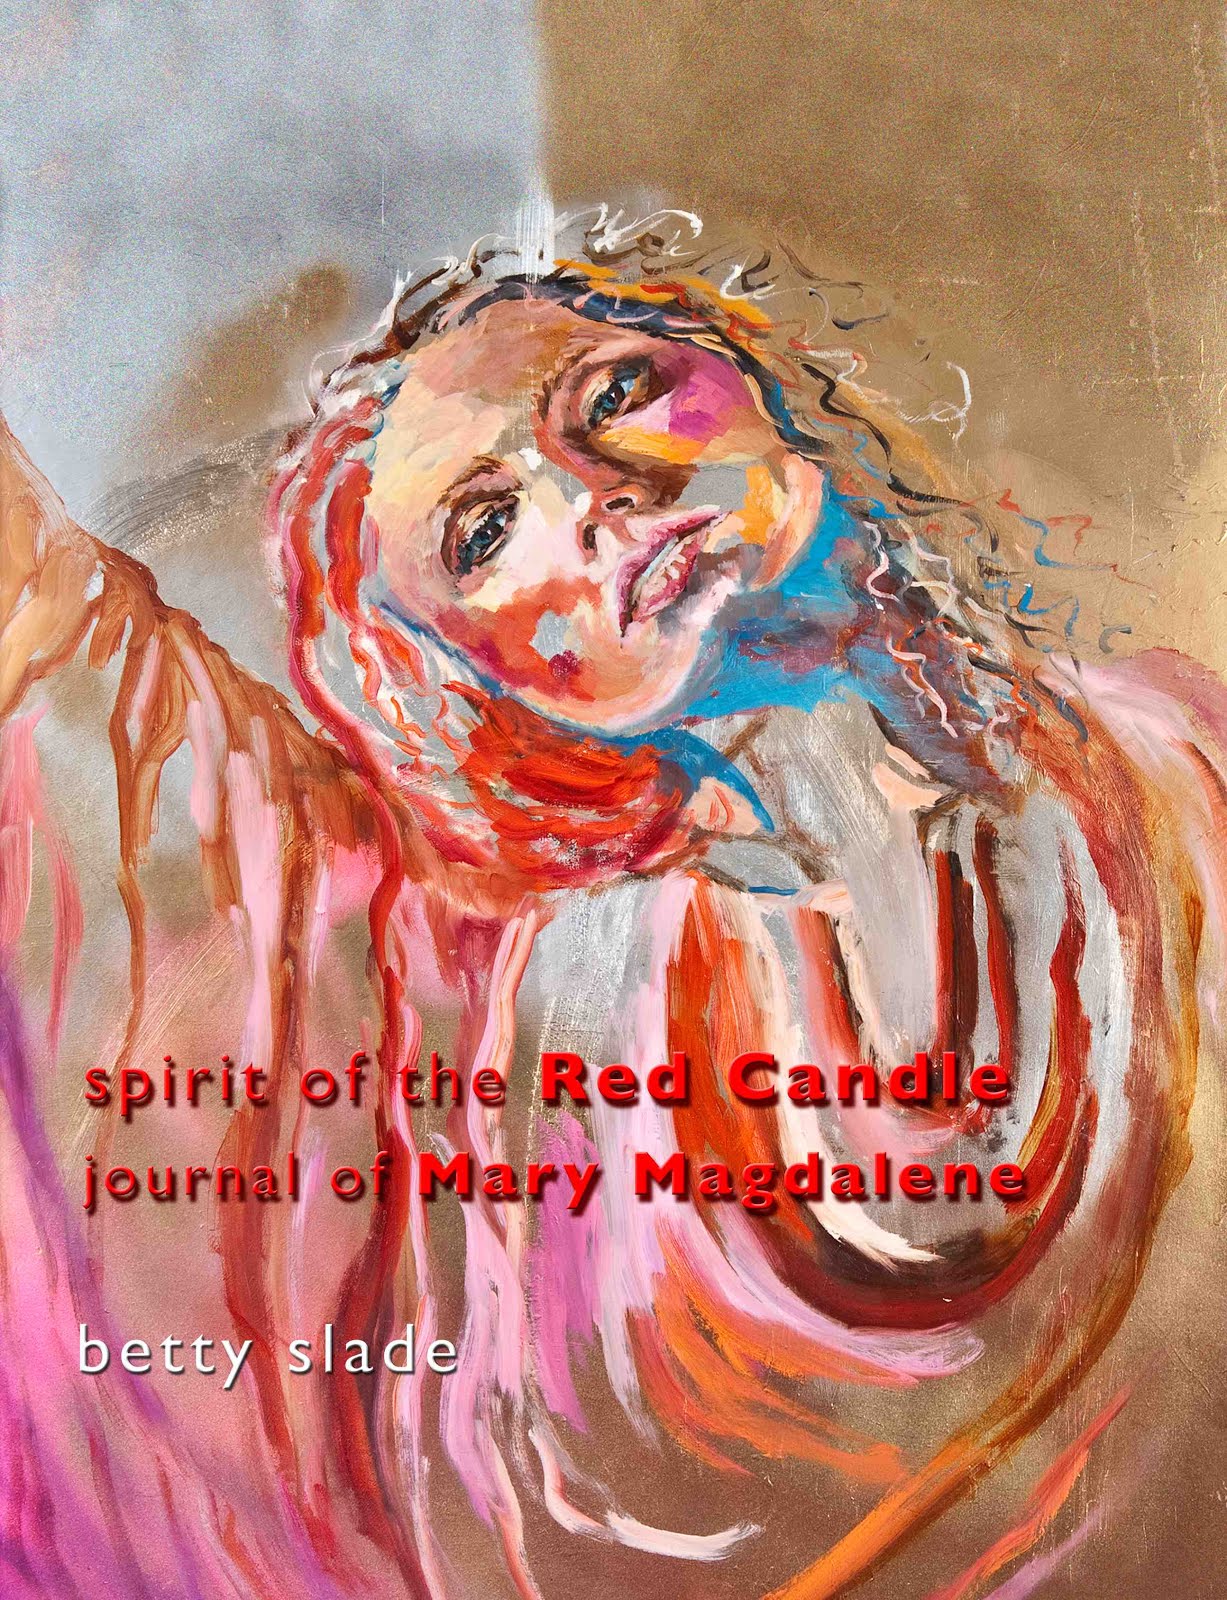 Spirit of the Red Candle: Journal of Mary Magdalene - Betty Slade